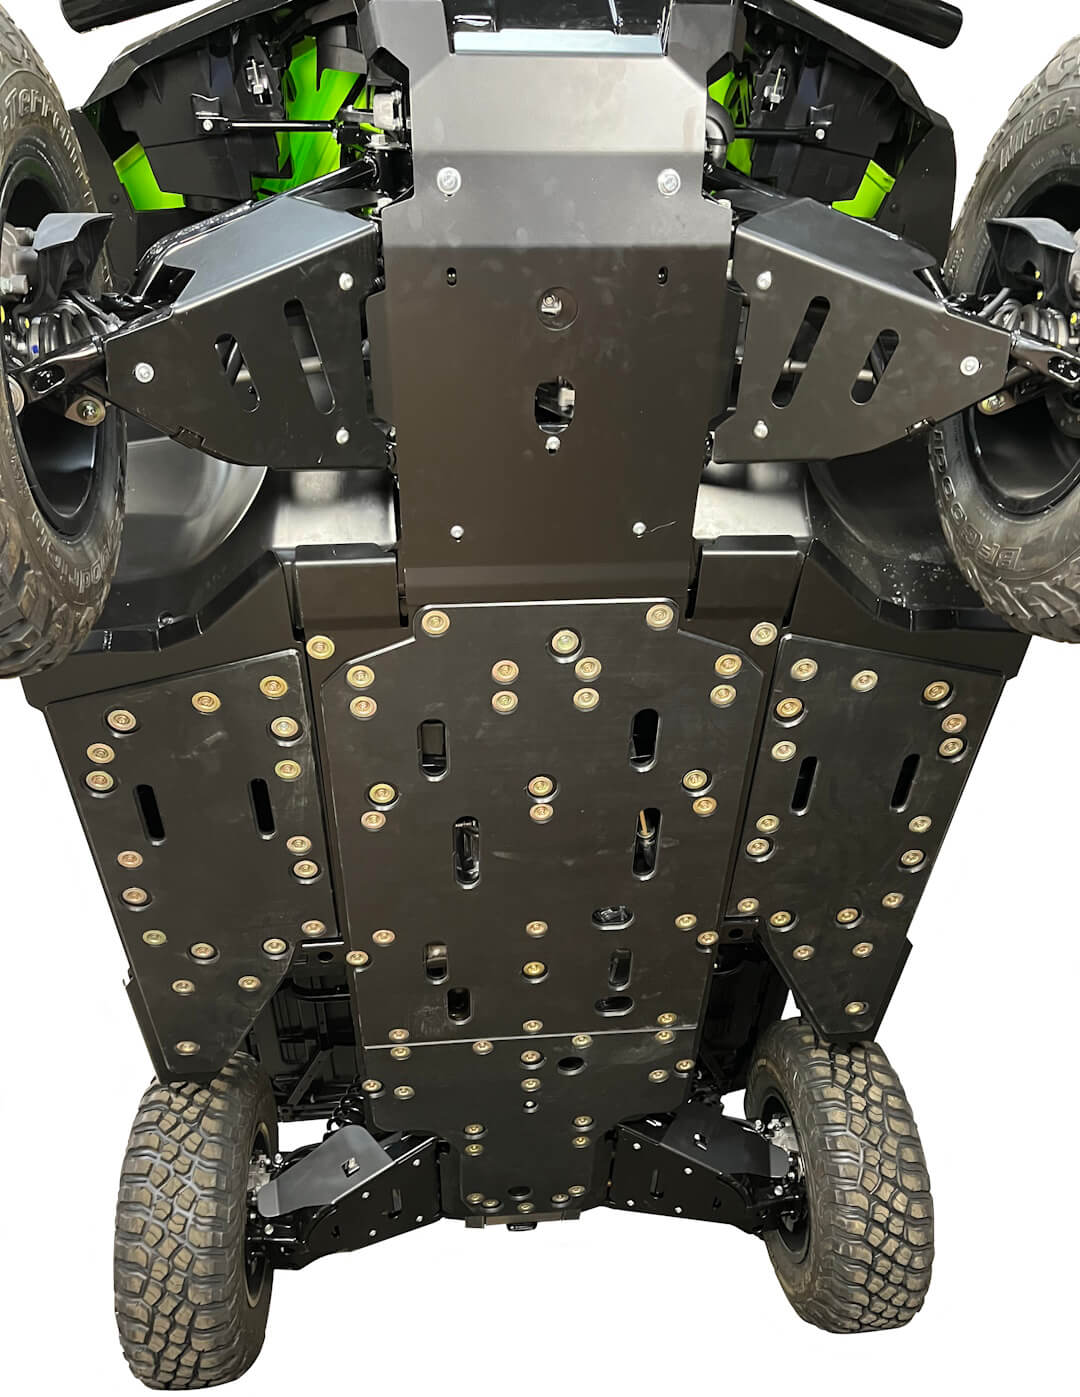 9-Piece Complete Skid Plate Set in Aluminum or with UHMW, 2022-2023 Honda Pioneer 1000/ 1000-5